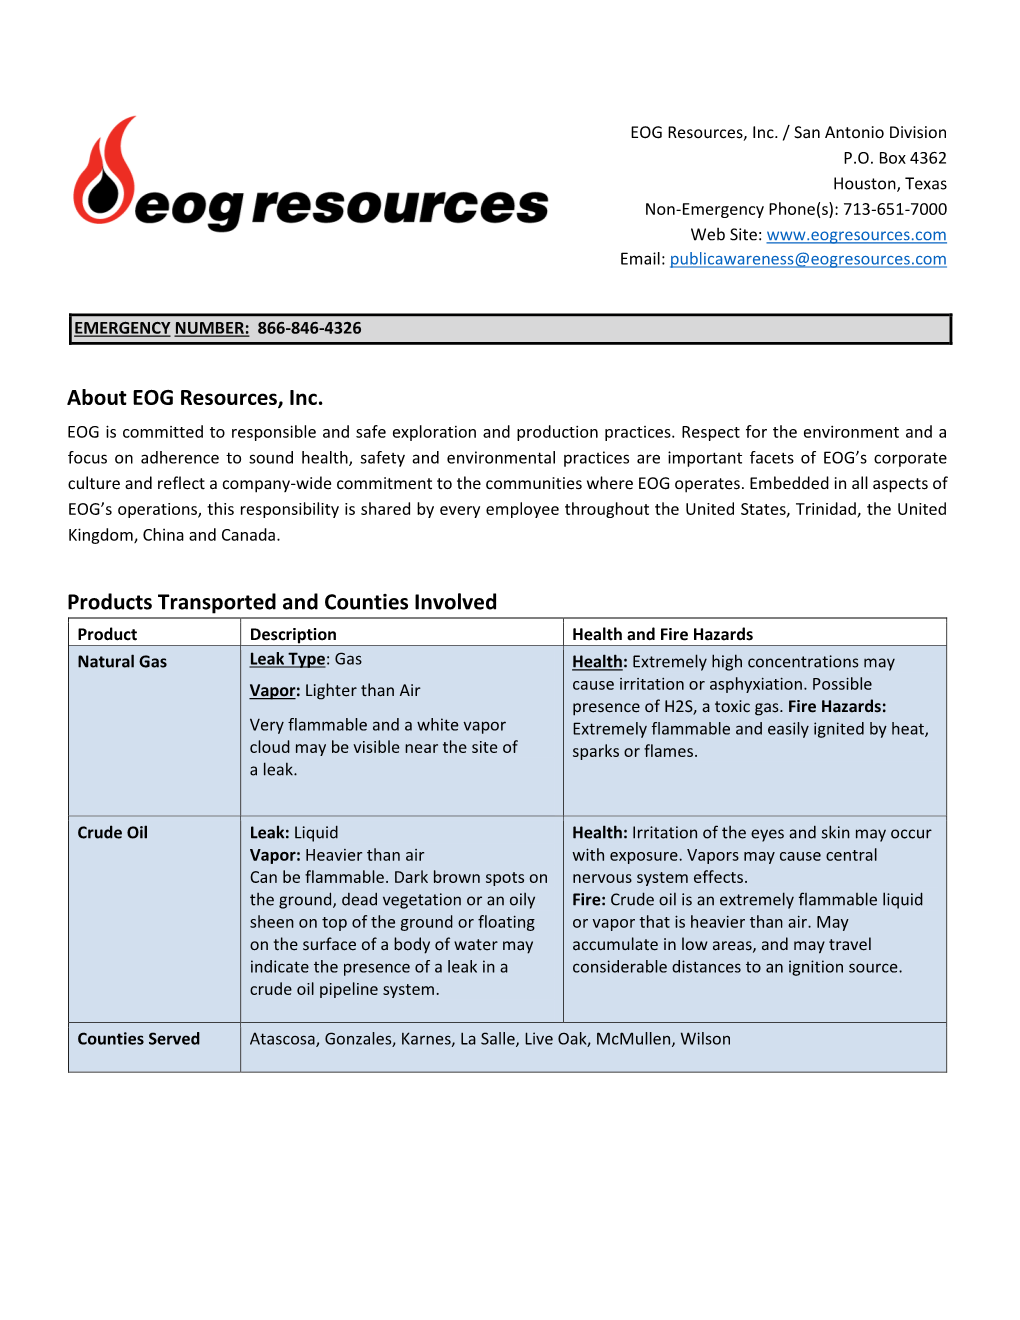 About EOG Resources, Inc. Products Transported and Counties Involved